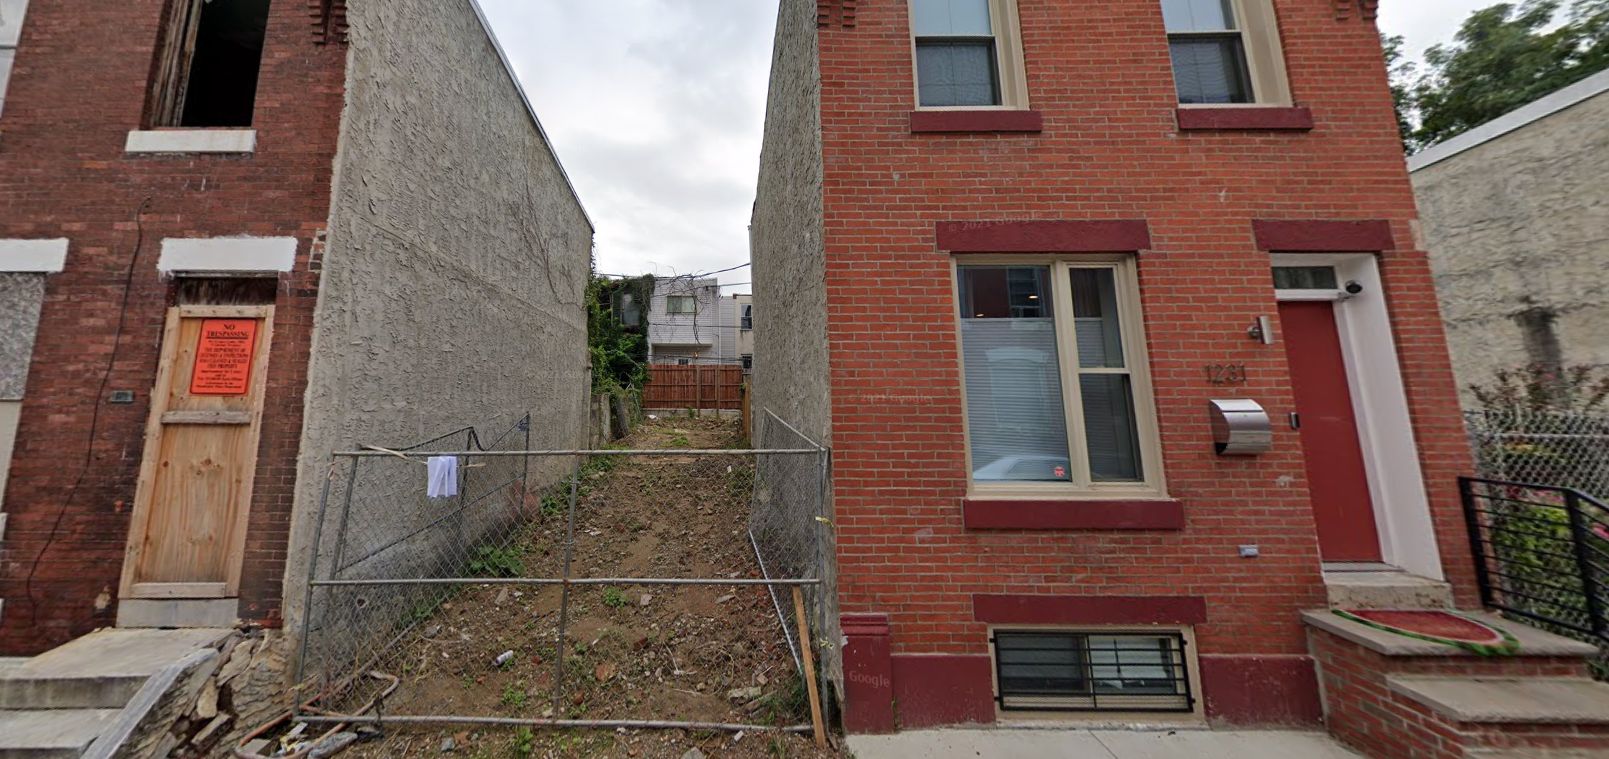 1233 North Myrtlewood Street. Site conditions prior to redevelopment. Looking east. October 2018. Credit: Google Maps